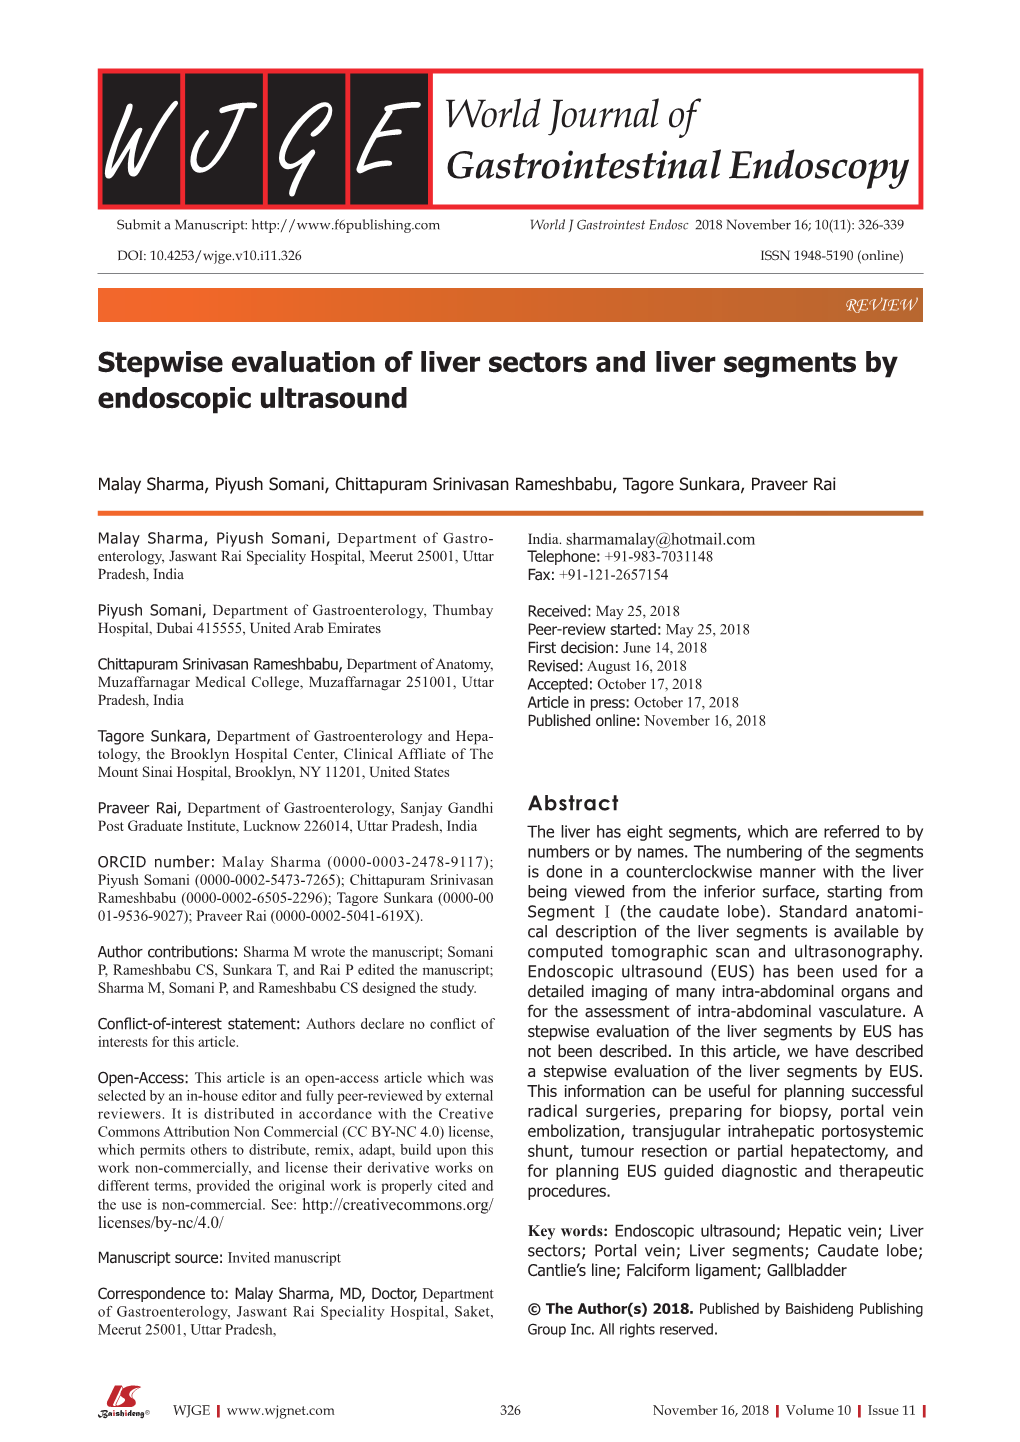 Stepwise Evaluation of Liver Sectors and Liver Segments by Endoscopic Ultrasound